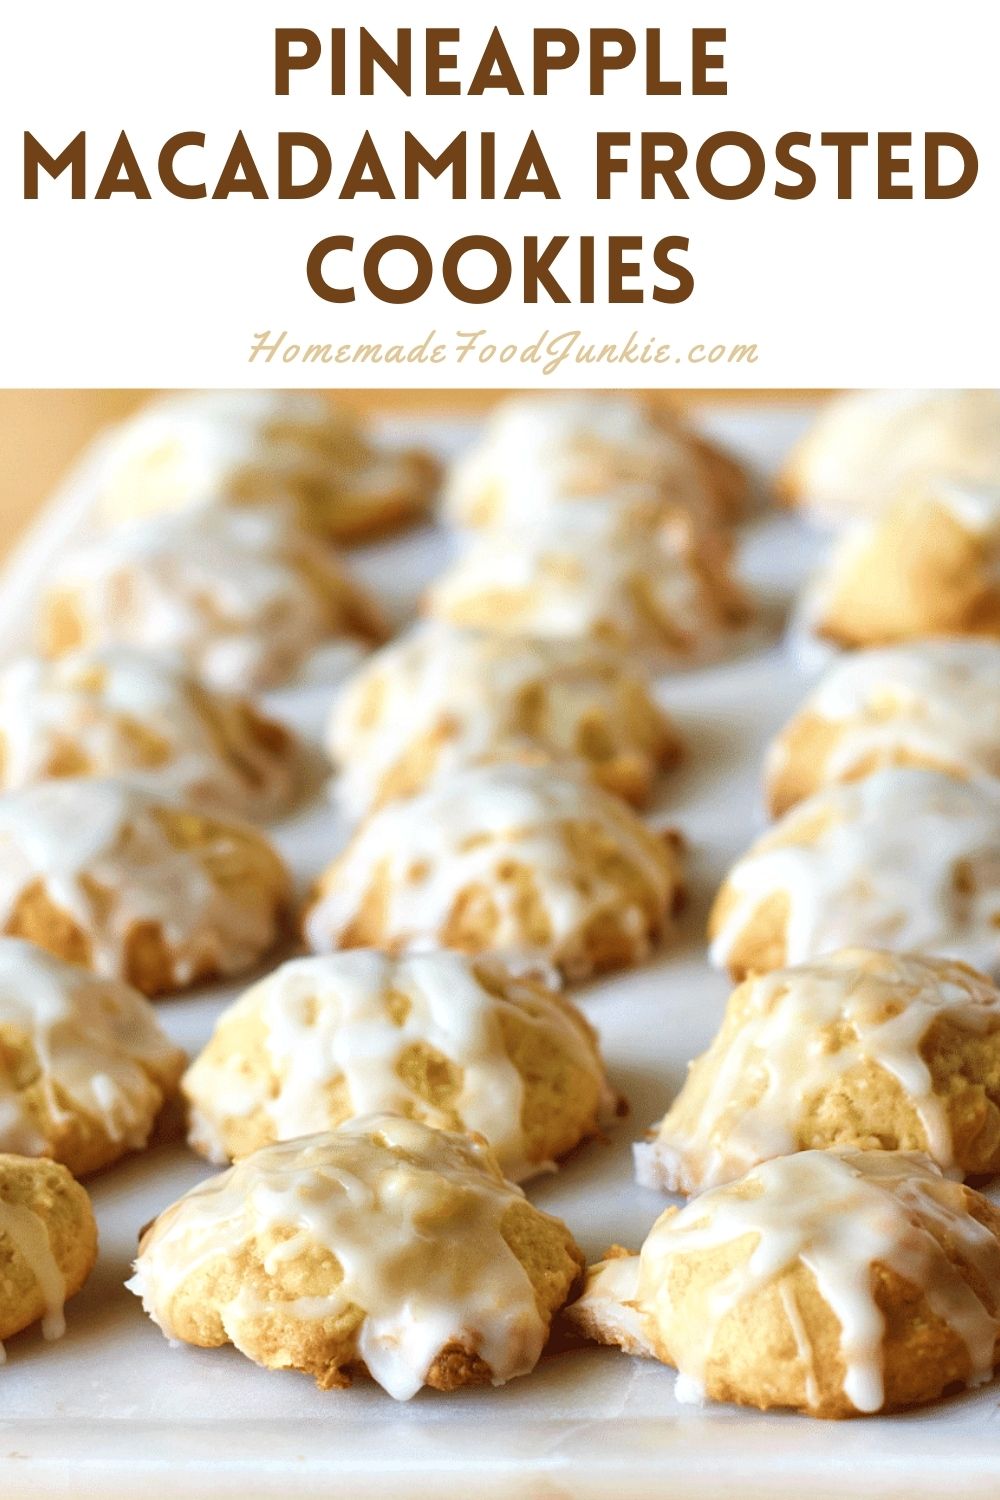 Pineapple Macadamia Frosted Cookies-Pin Image